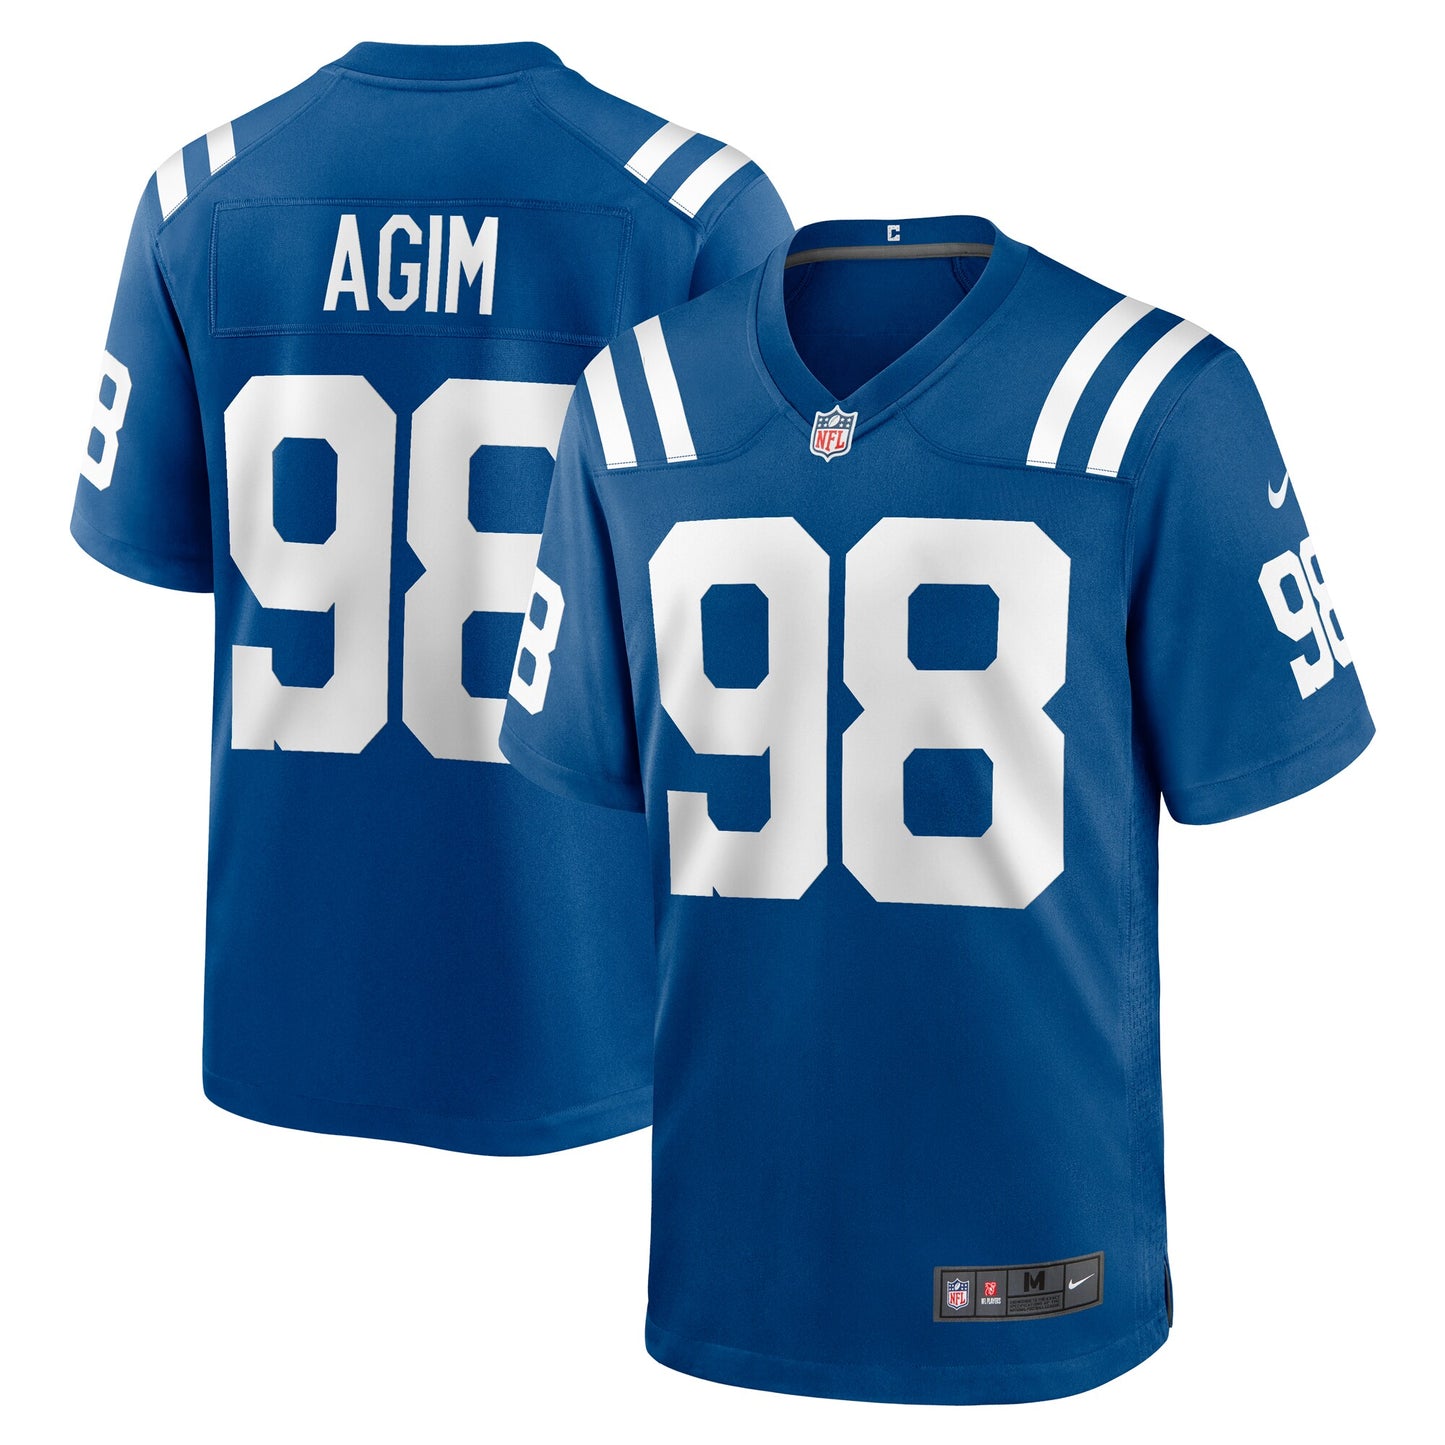 McTelvin Agim Indianapolis Colts Nike Team Game Jersey - Royal